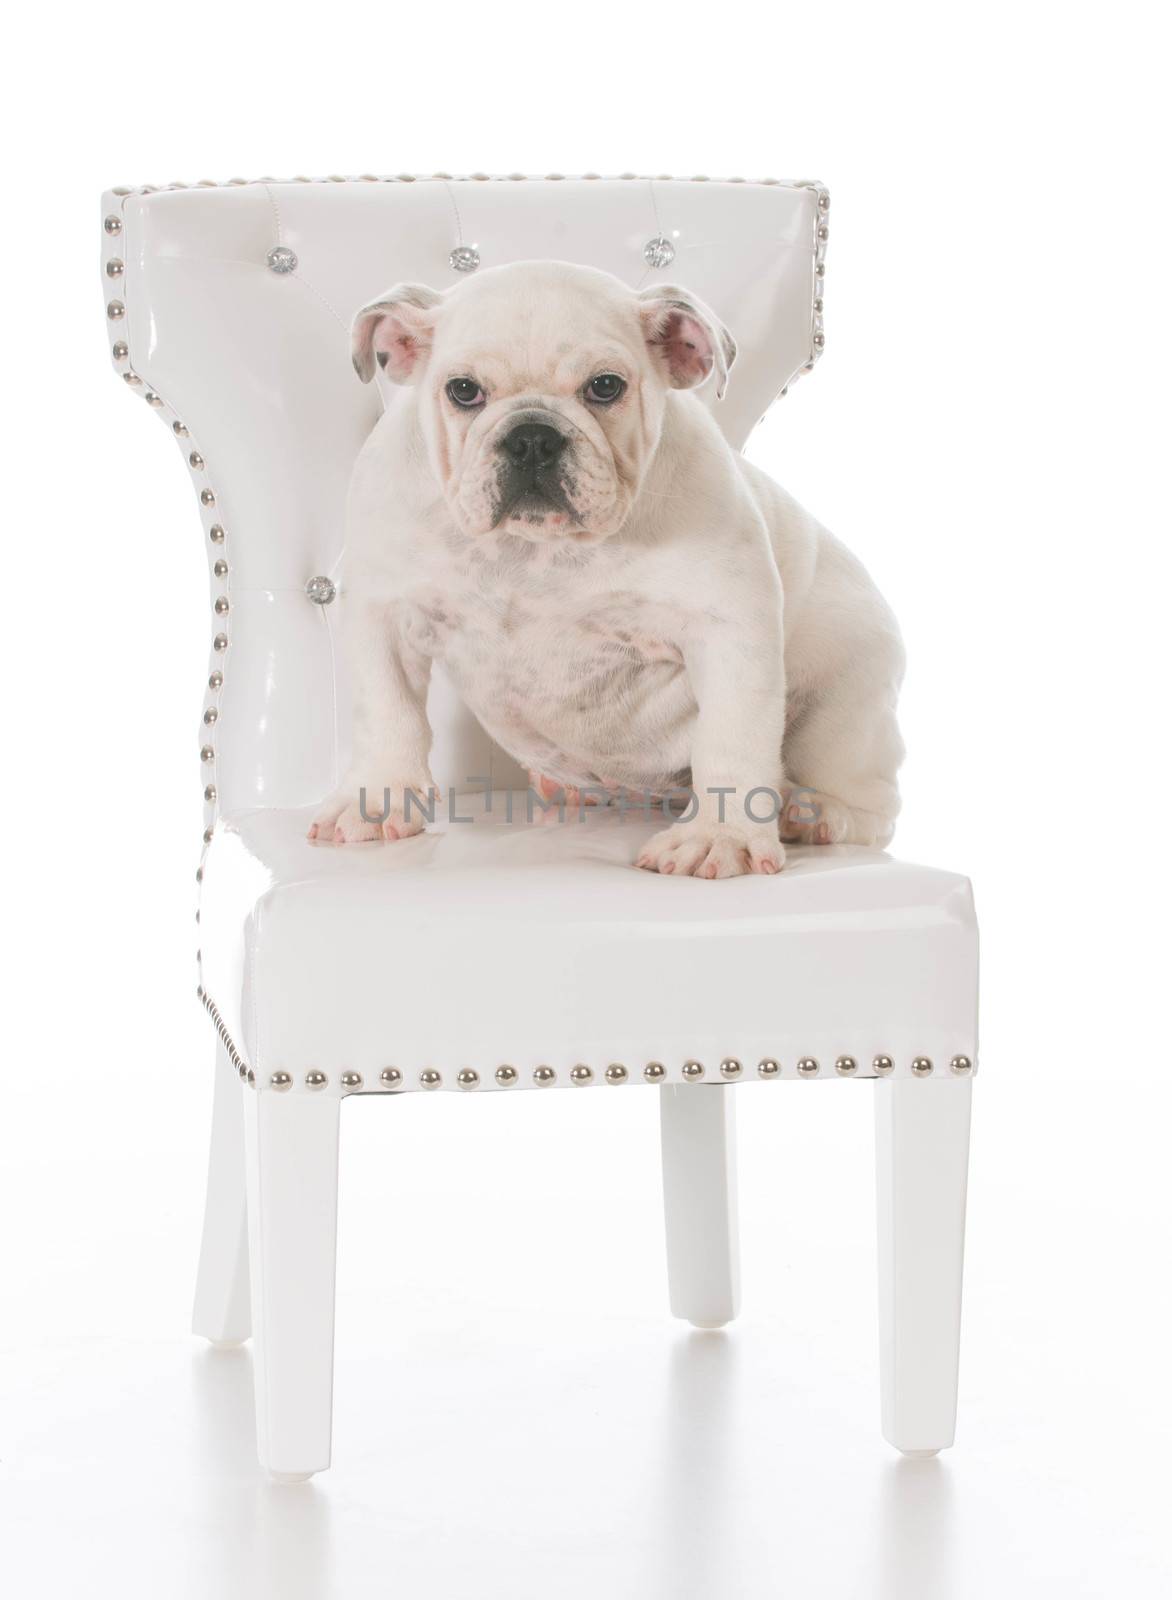 cute english bulldog puppy sitting on a white chair on white background